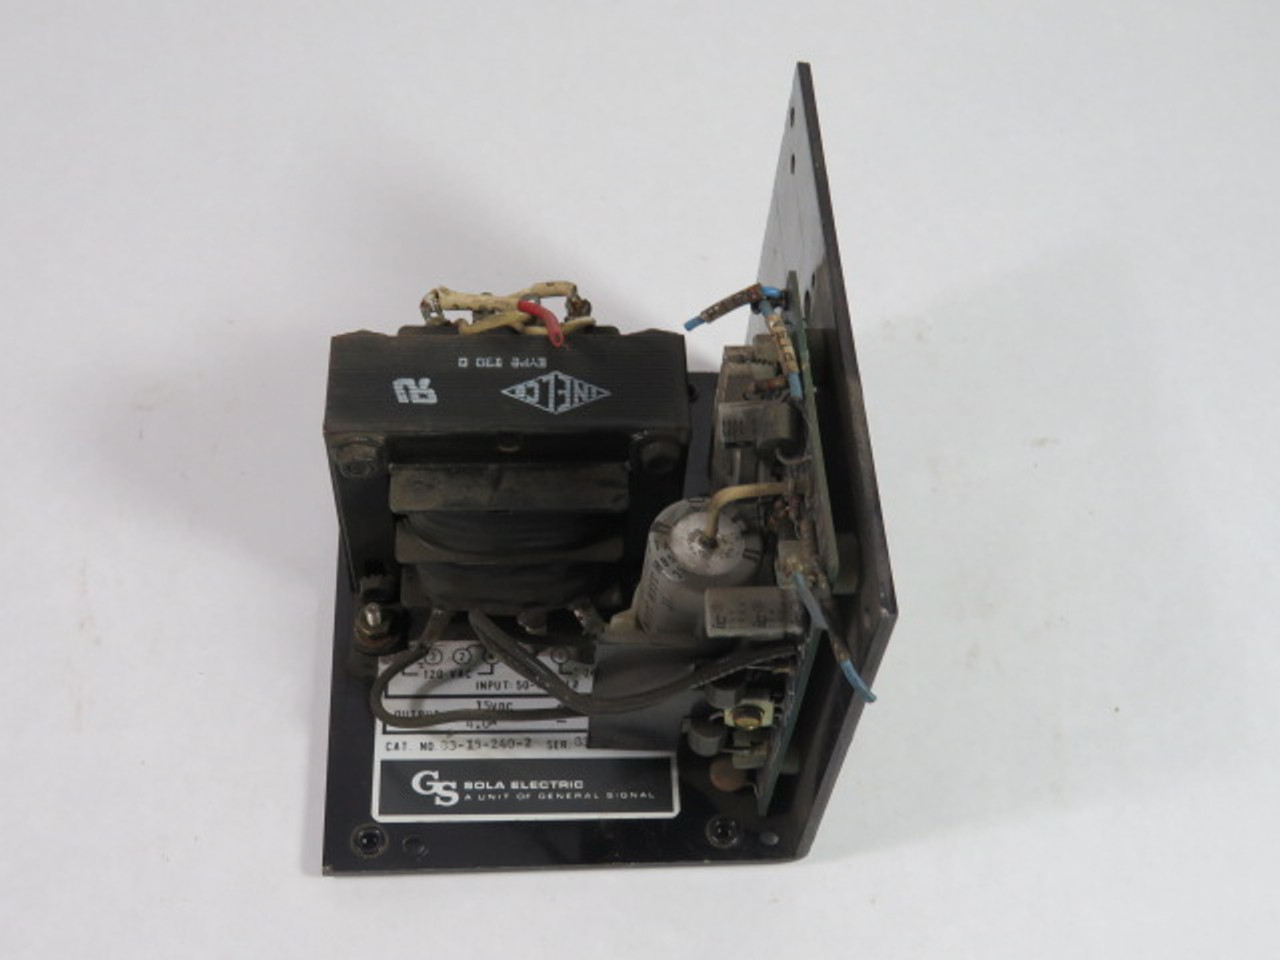 Sola Electric 83-15-240-2 Power Supply Ser 83B160-FP 15VDC 4A 50-400Hz USED